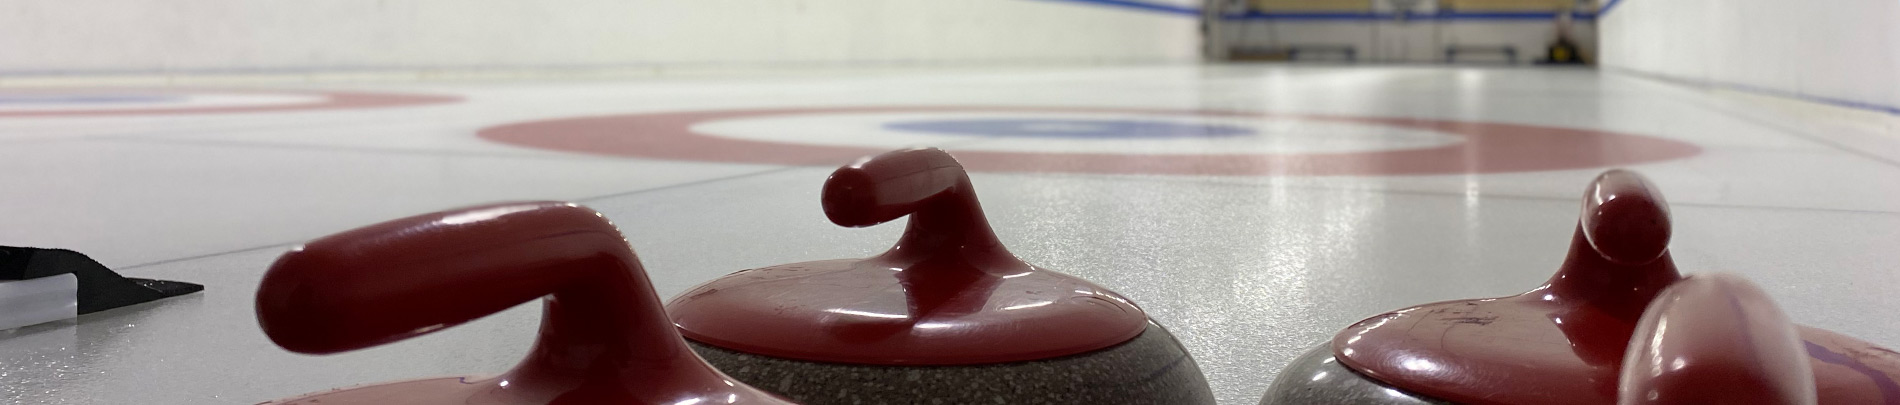 A close up view of curling stones with the ice sheet in the background.